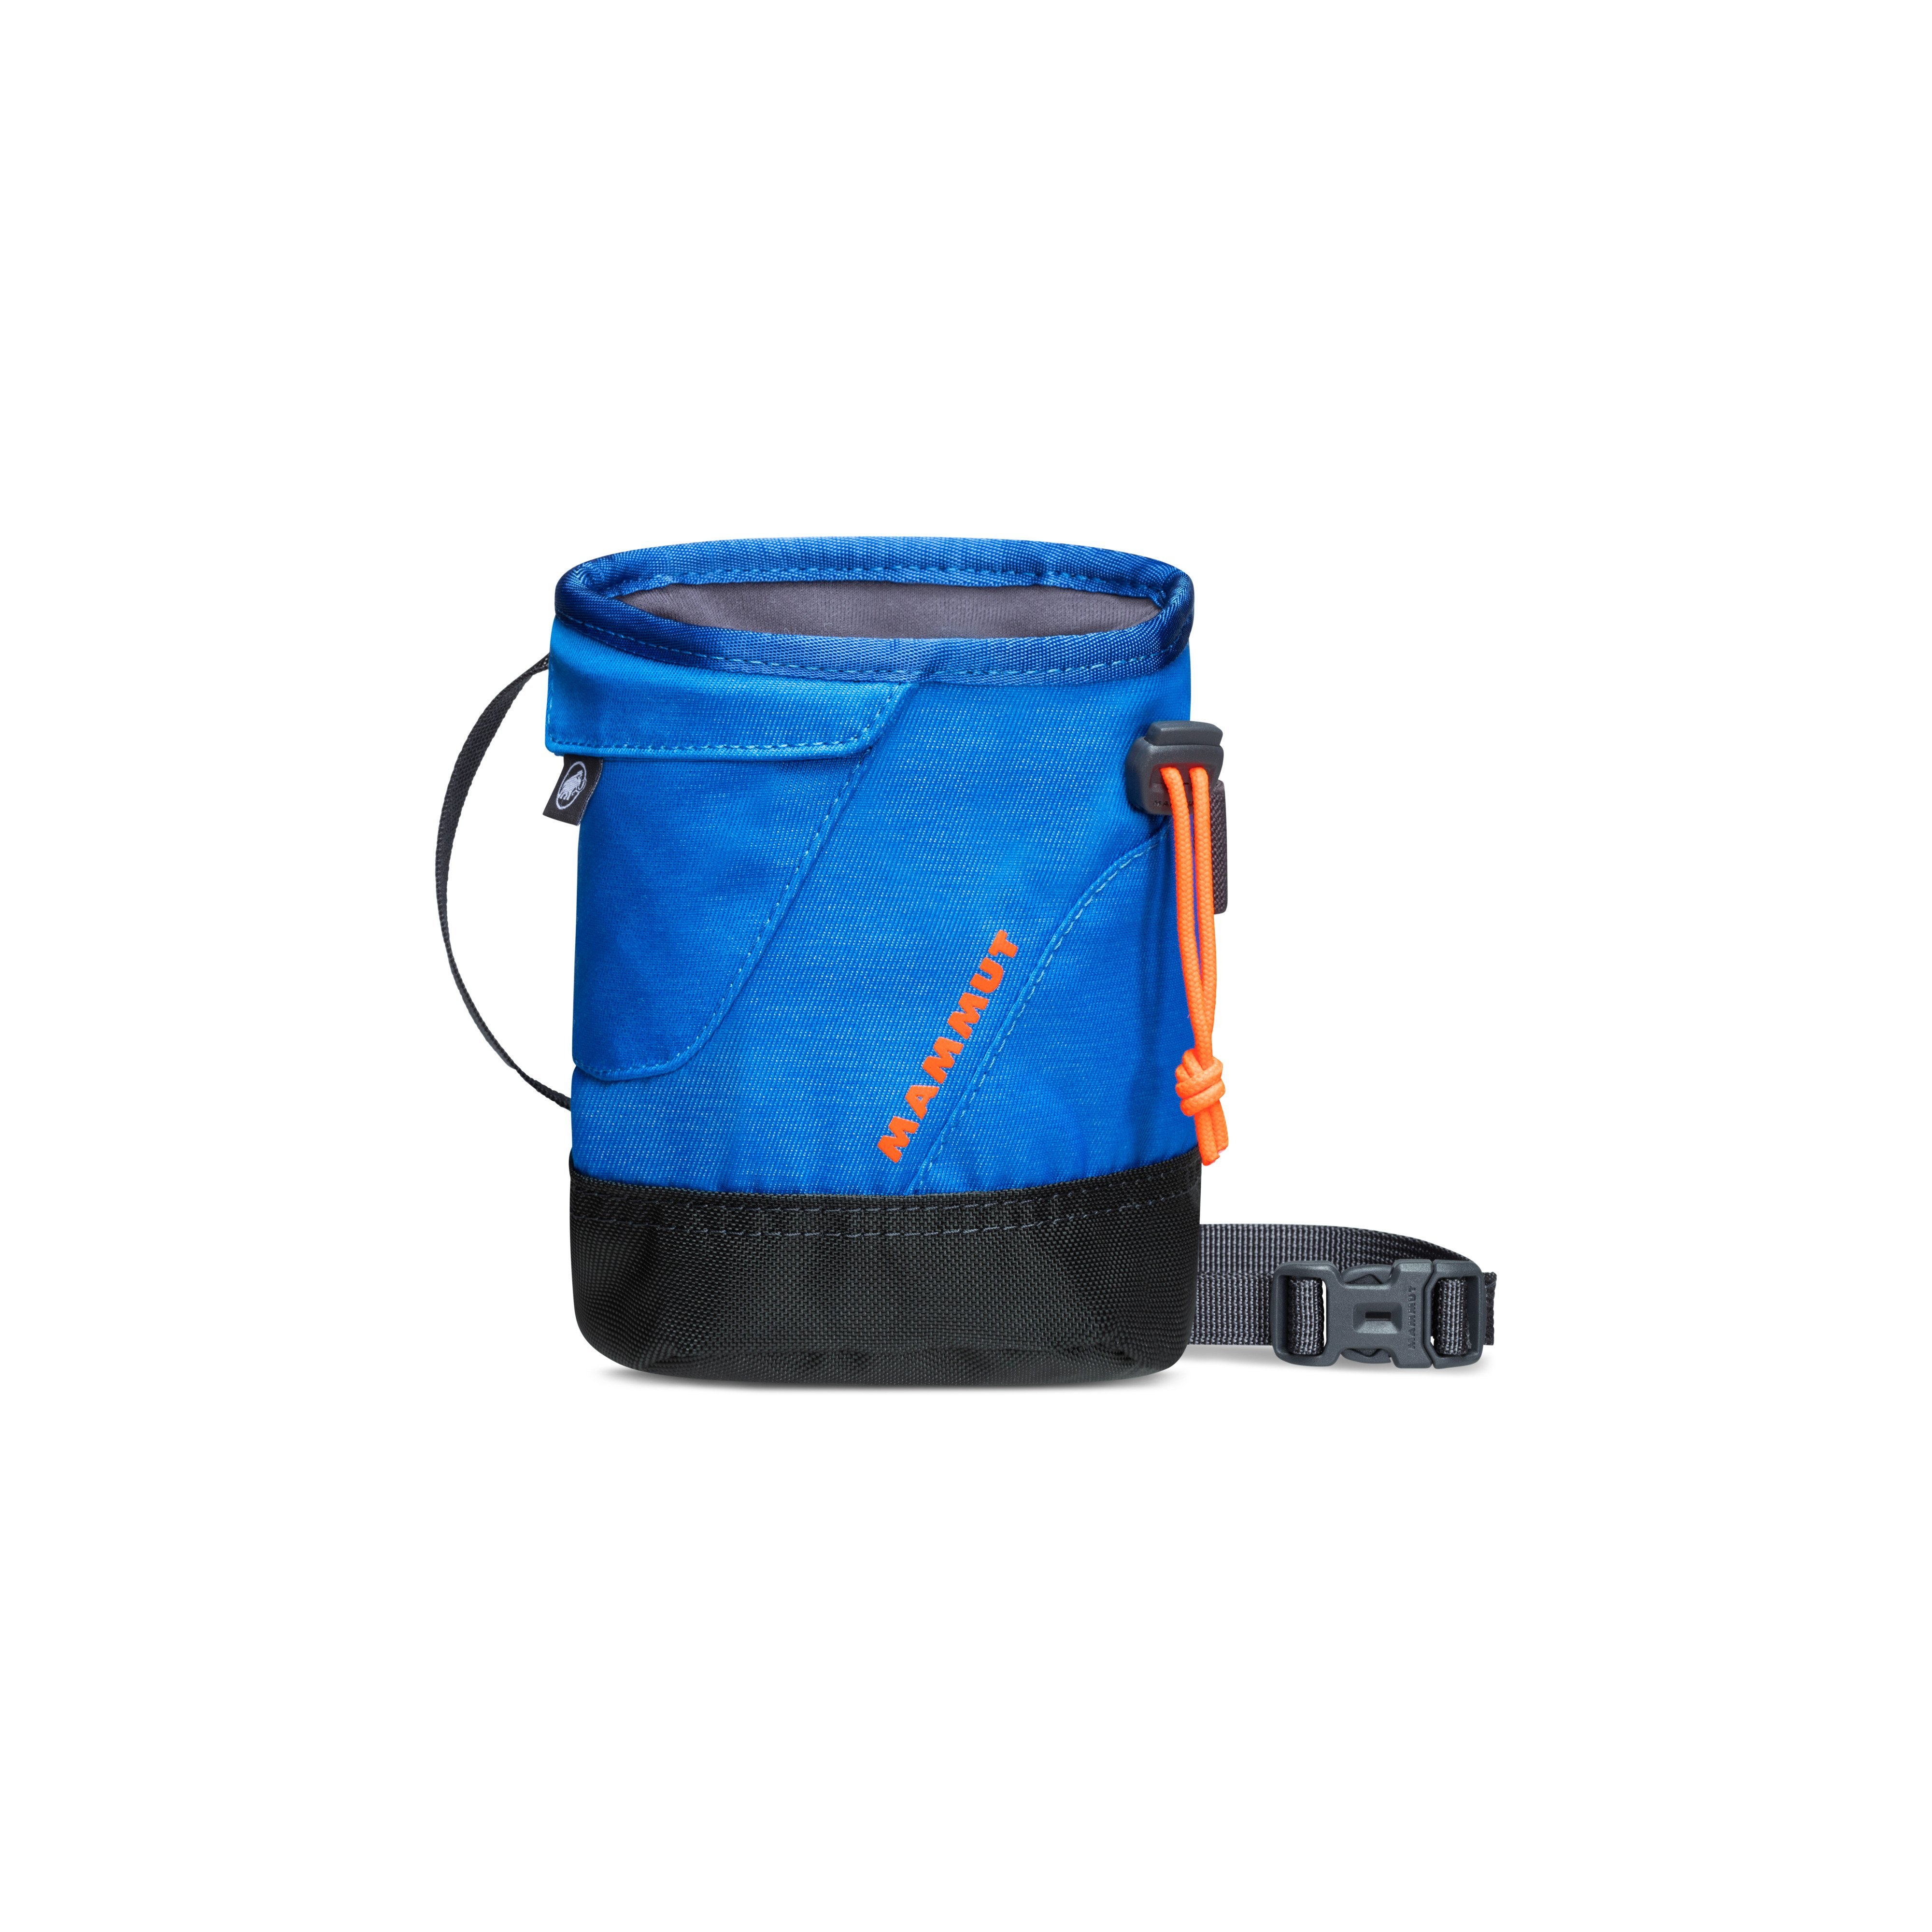 Ophir Chalk Bag - dark gentian, one size product image